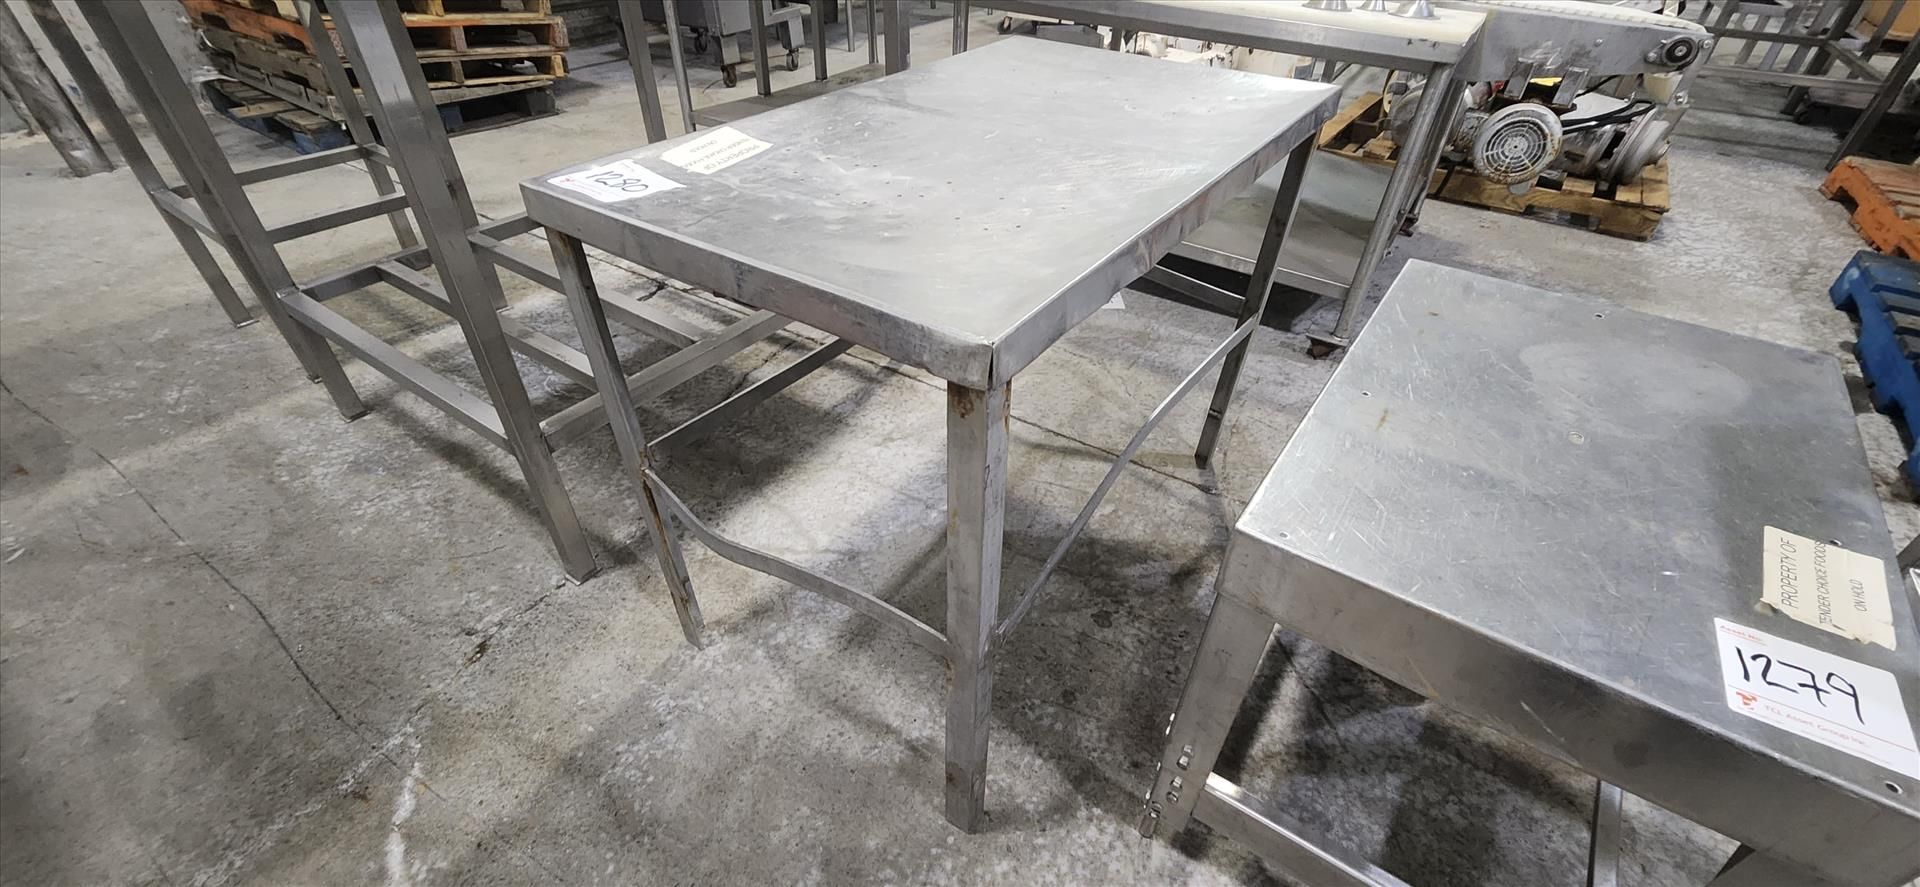 table, stainless steel, approx. 24 in. x 40 in. [TAG 1280 - LOC Brockley Dr.]